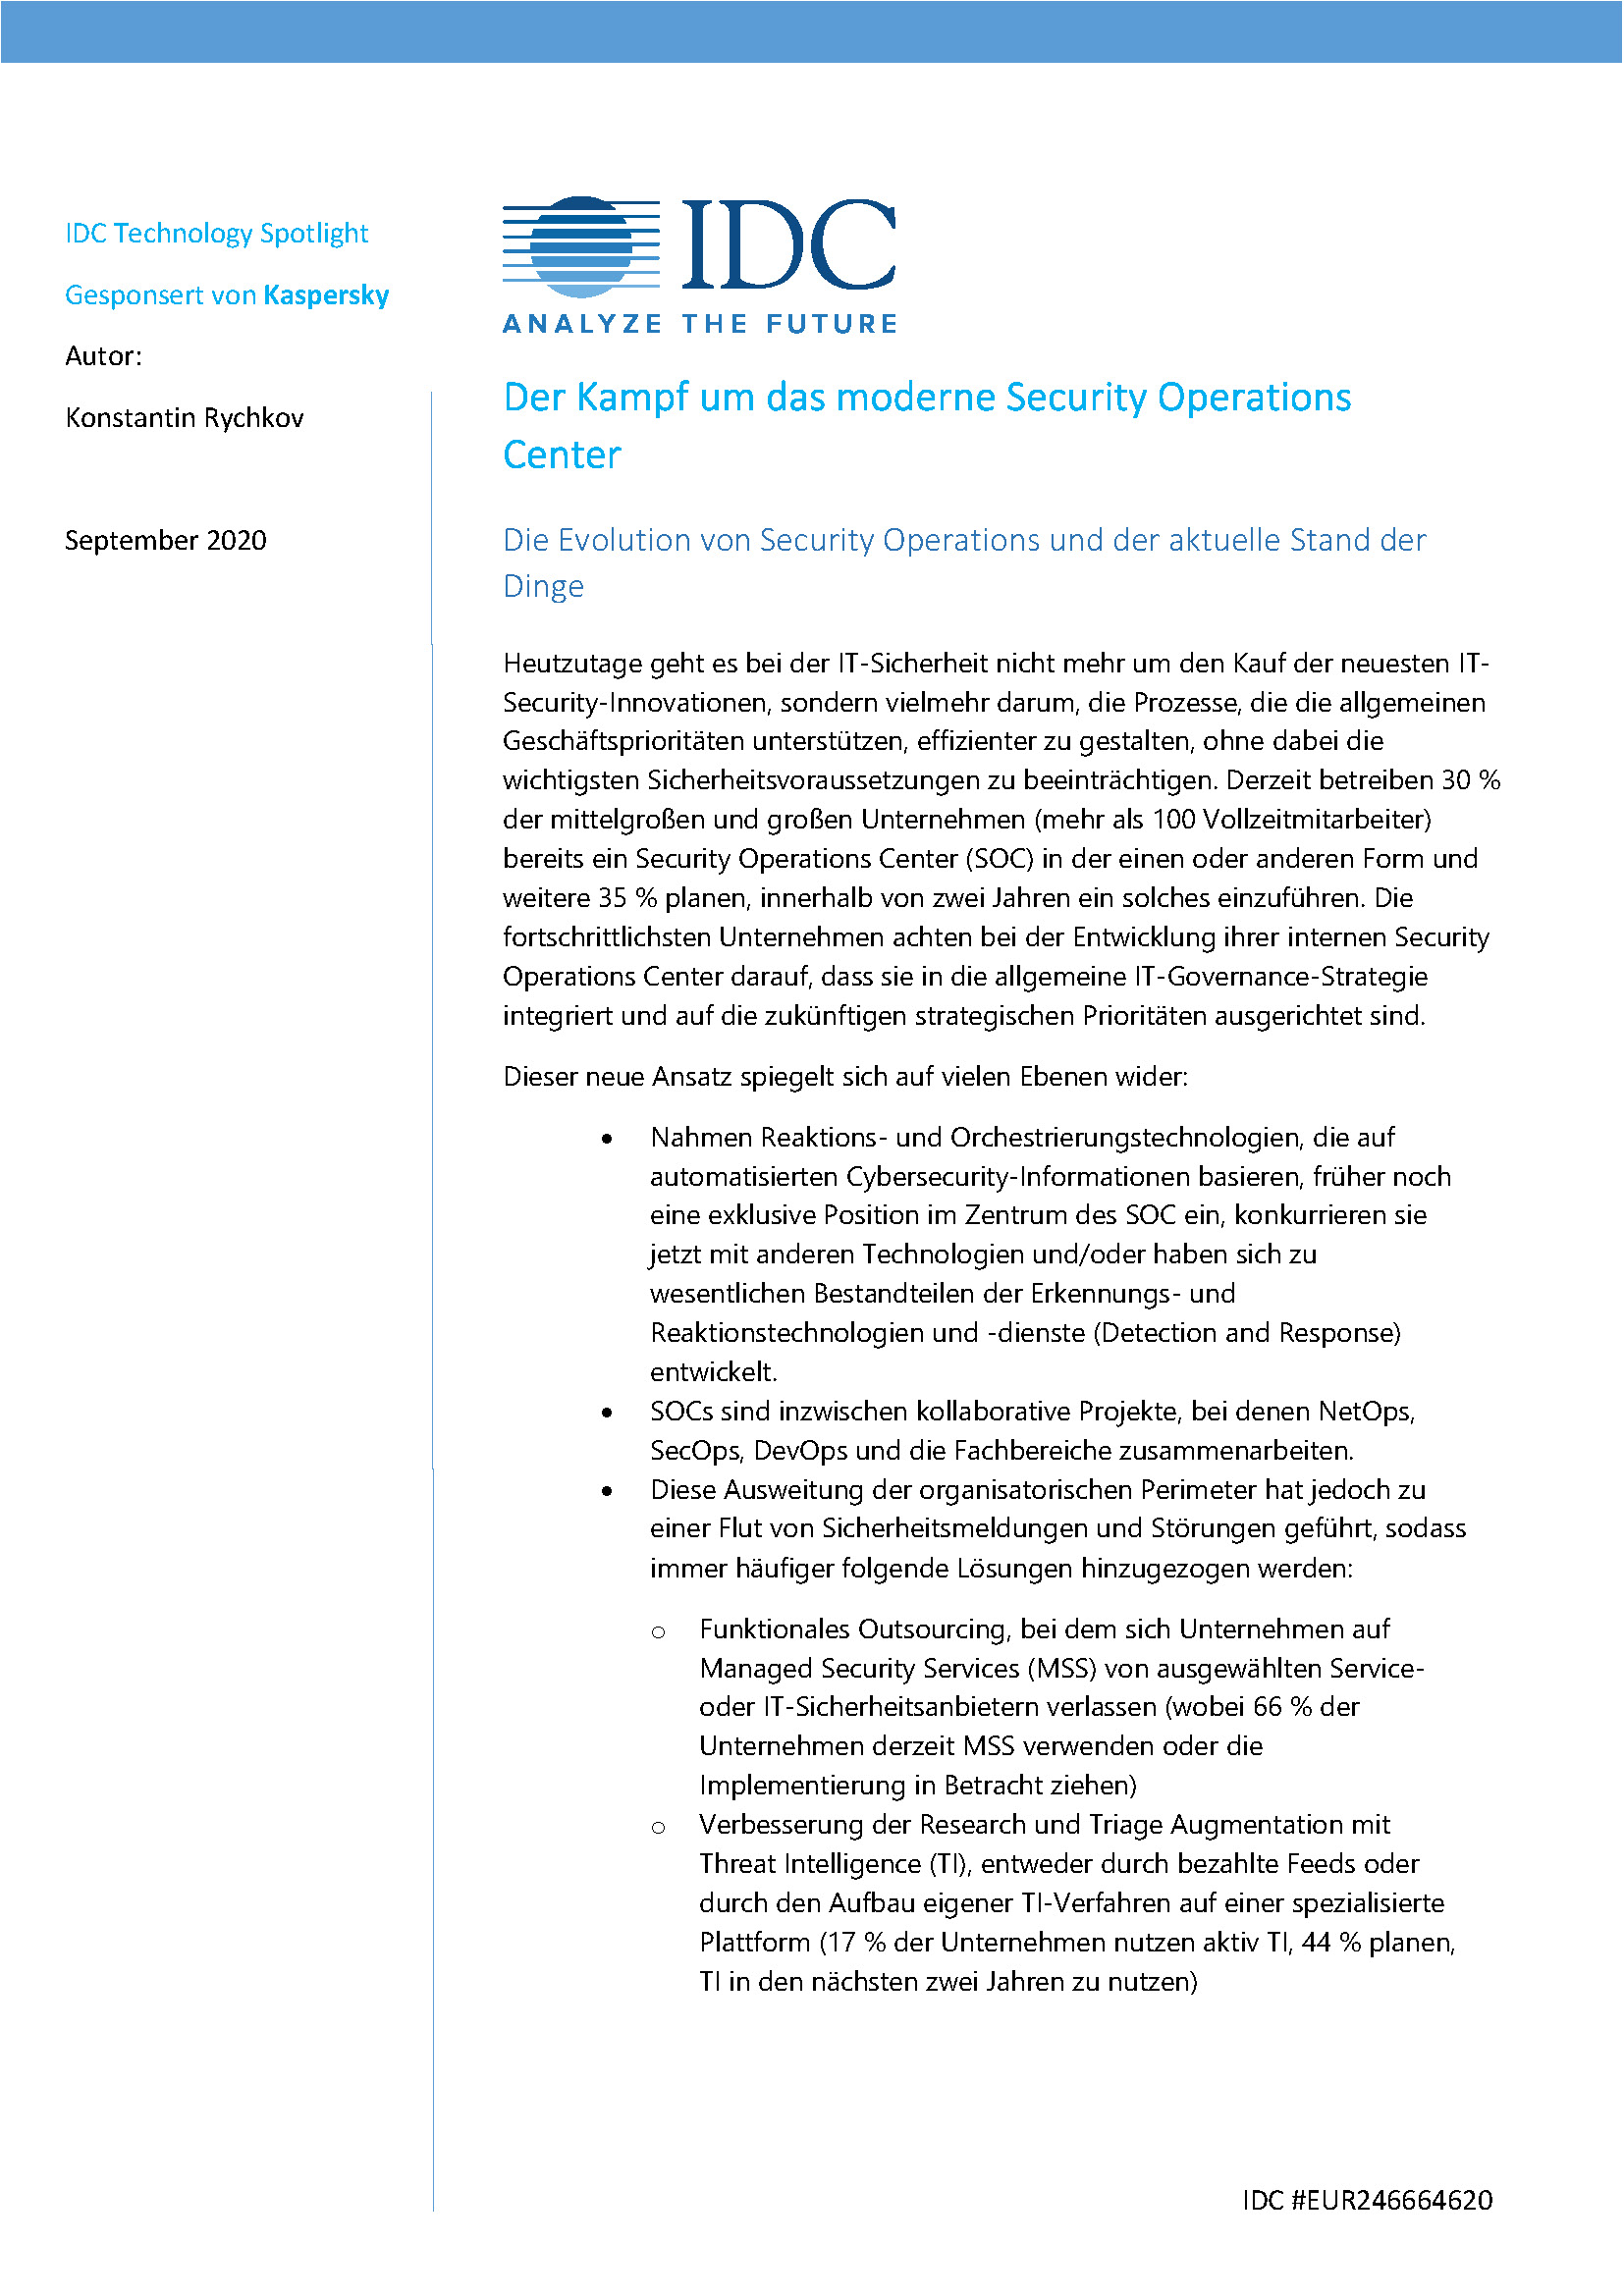 IDC Spotlight Integrated Security NA 1